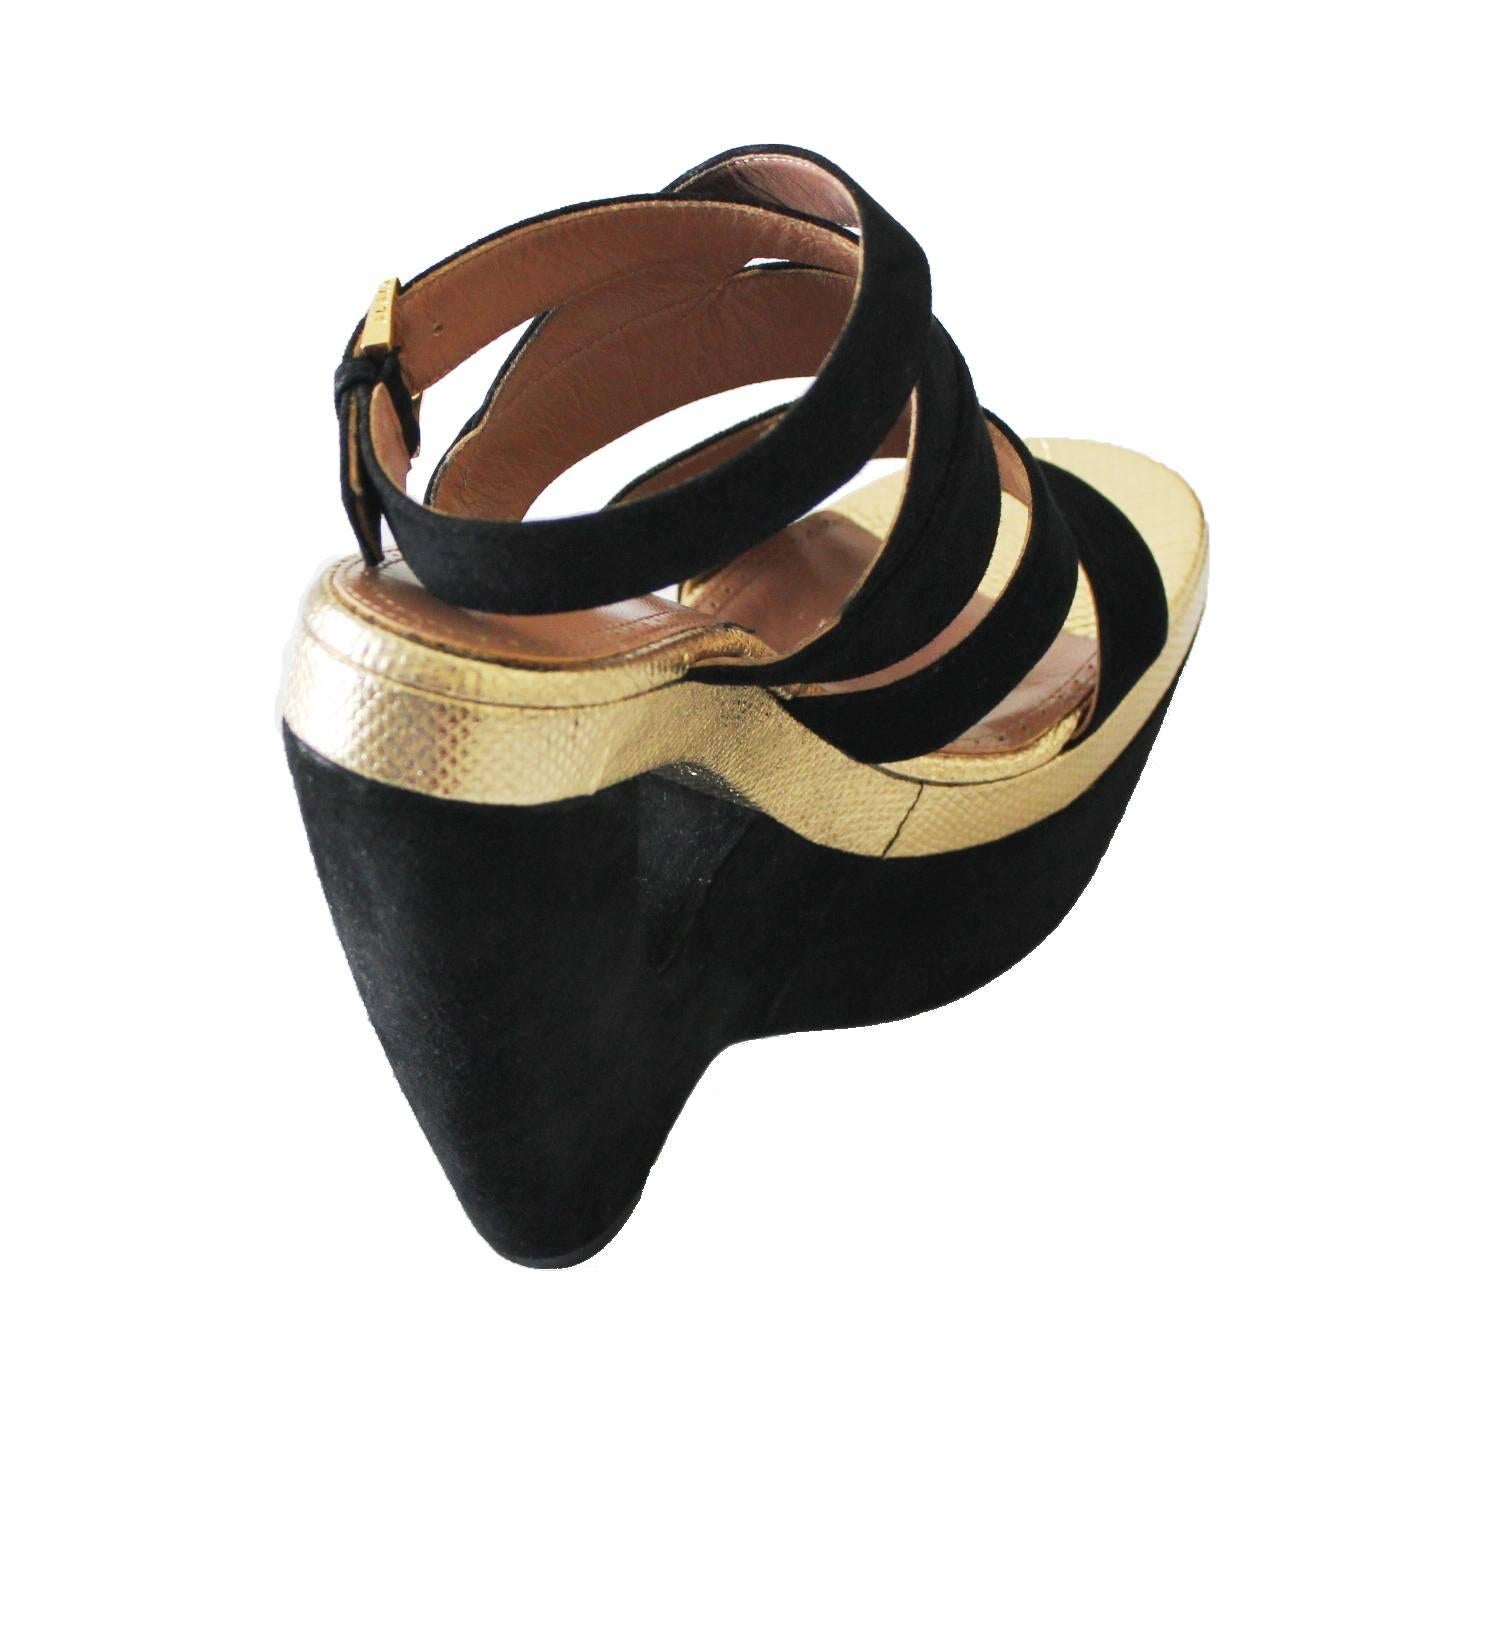 An AZZEDINE ALAIA classic signature piece that will last you for years
This gorgeous pair of wedges made out of finest black suede with cut-out wedge heel
Accented with real beautiful golden lizard leather
Golden closure discreetly engraved with